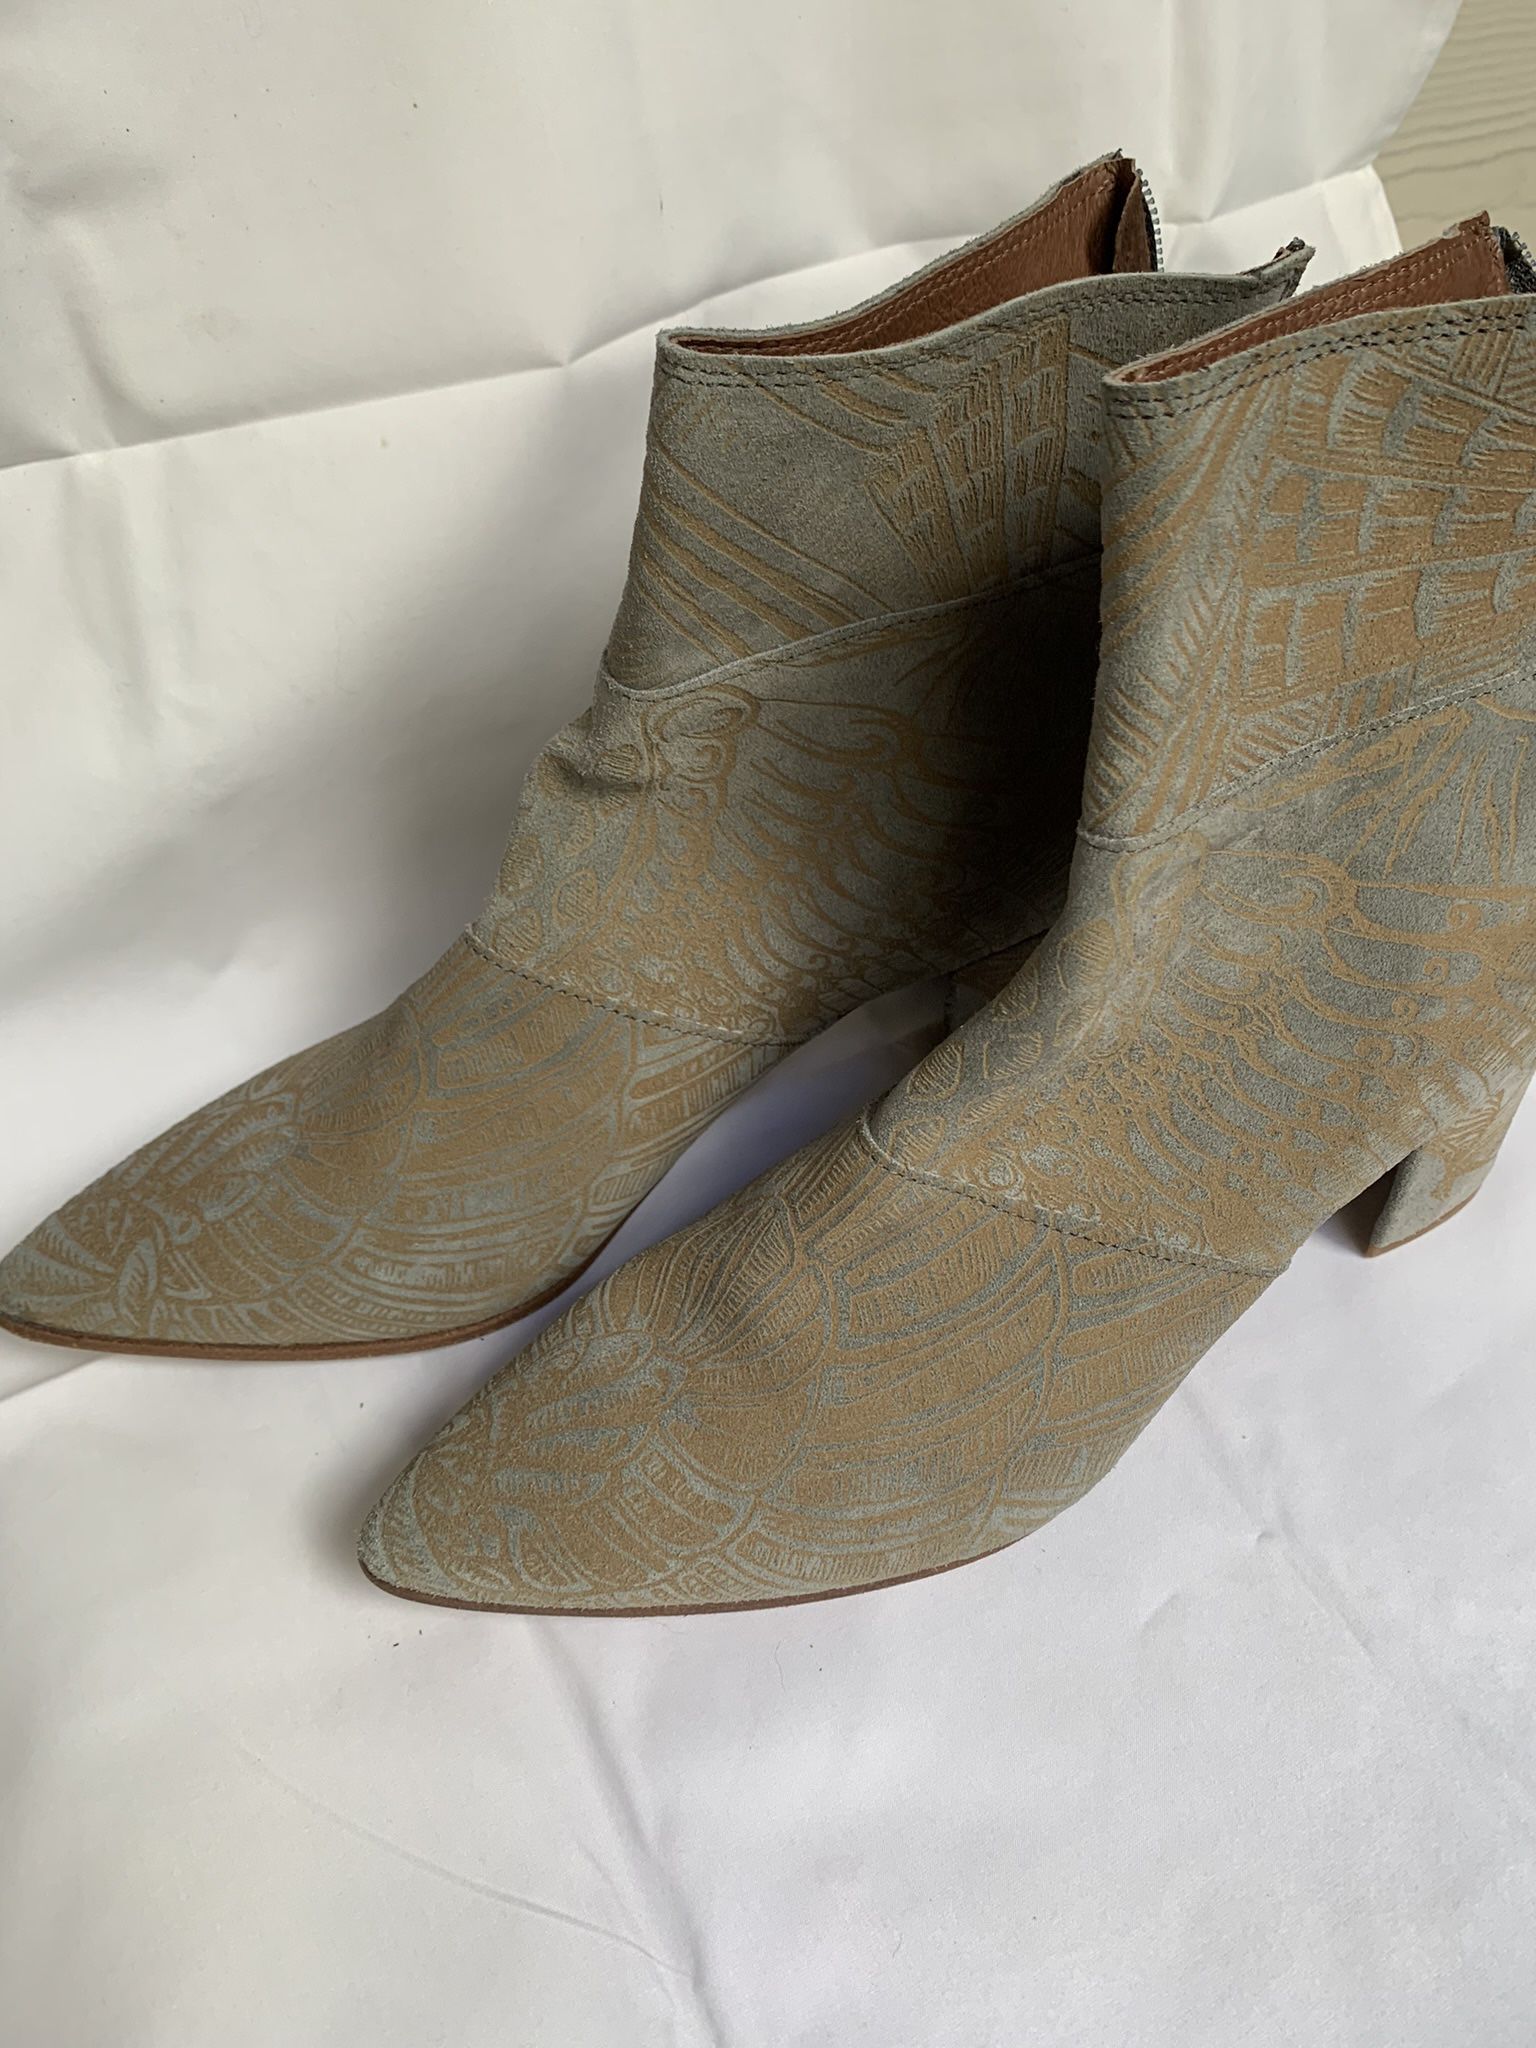 Embossed Suede Boots - Size 9, Made In Portugal